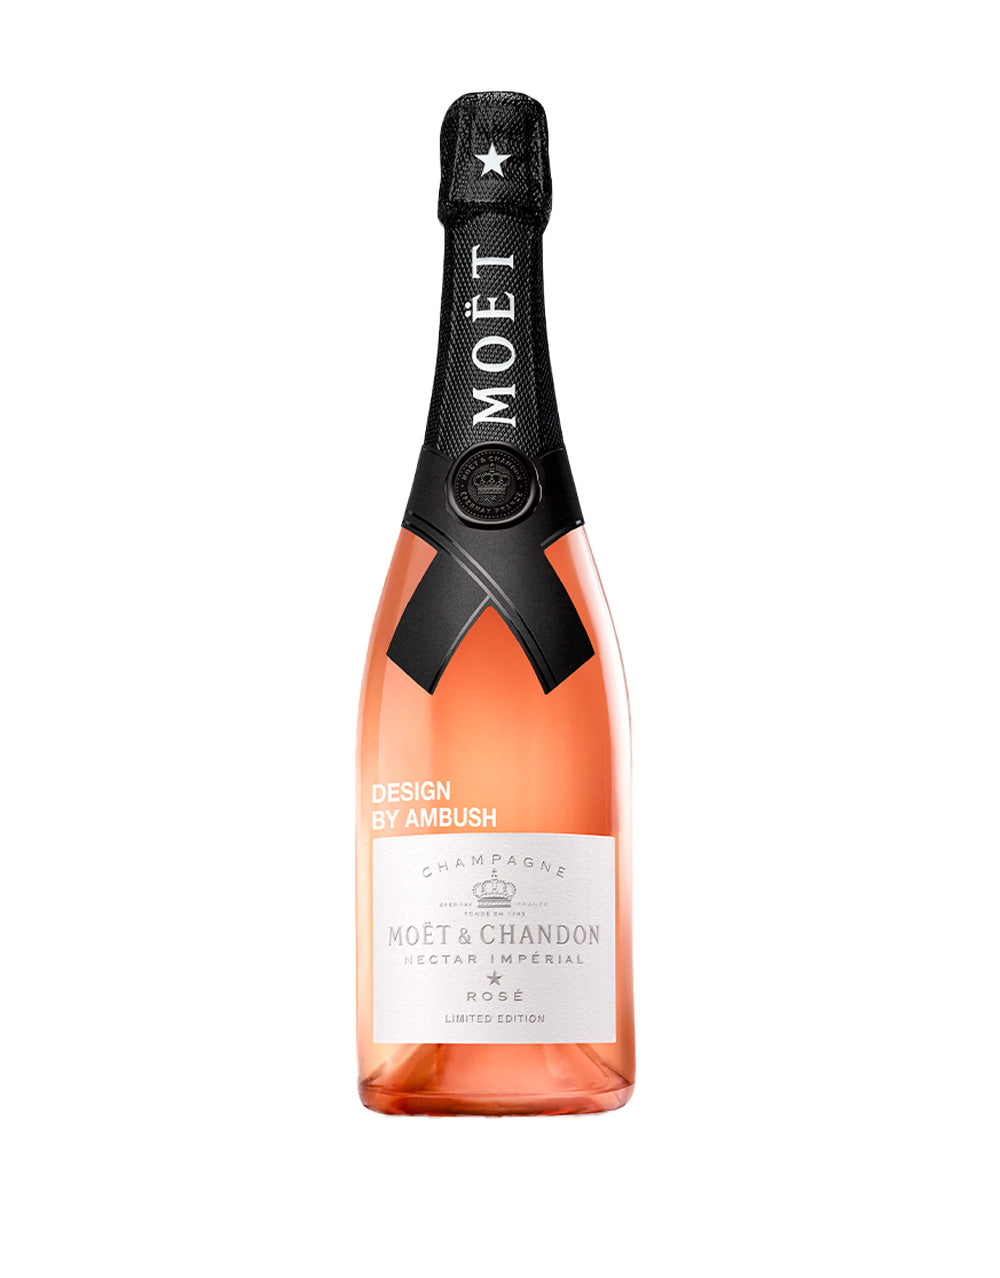 Moët & Chandon nectar imperial Rose – TheWineShopper